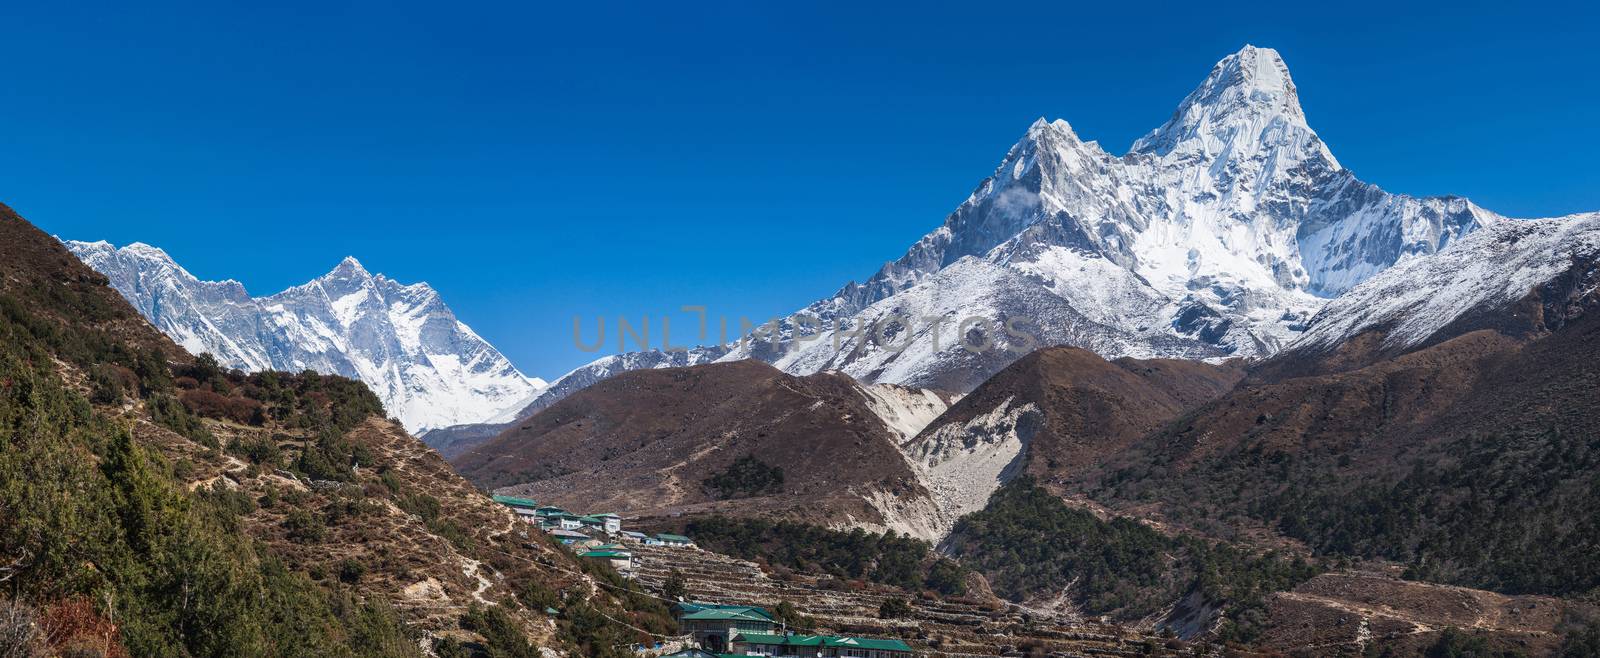 Panoramic view of Ama Dablam, Everest and Lhotse by Arsgera